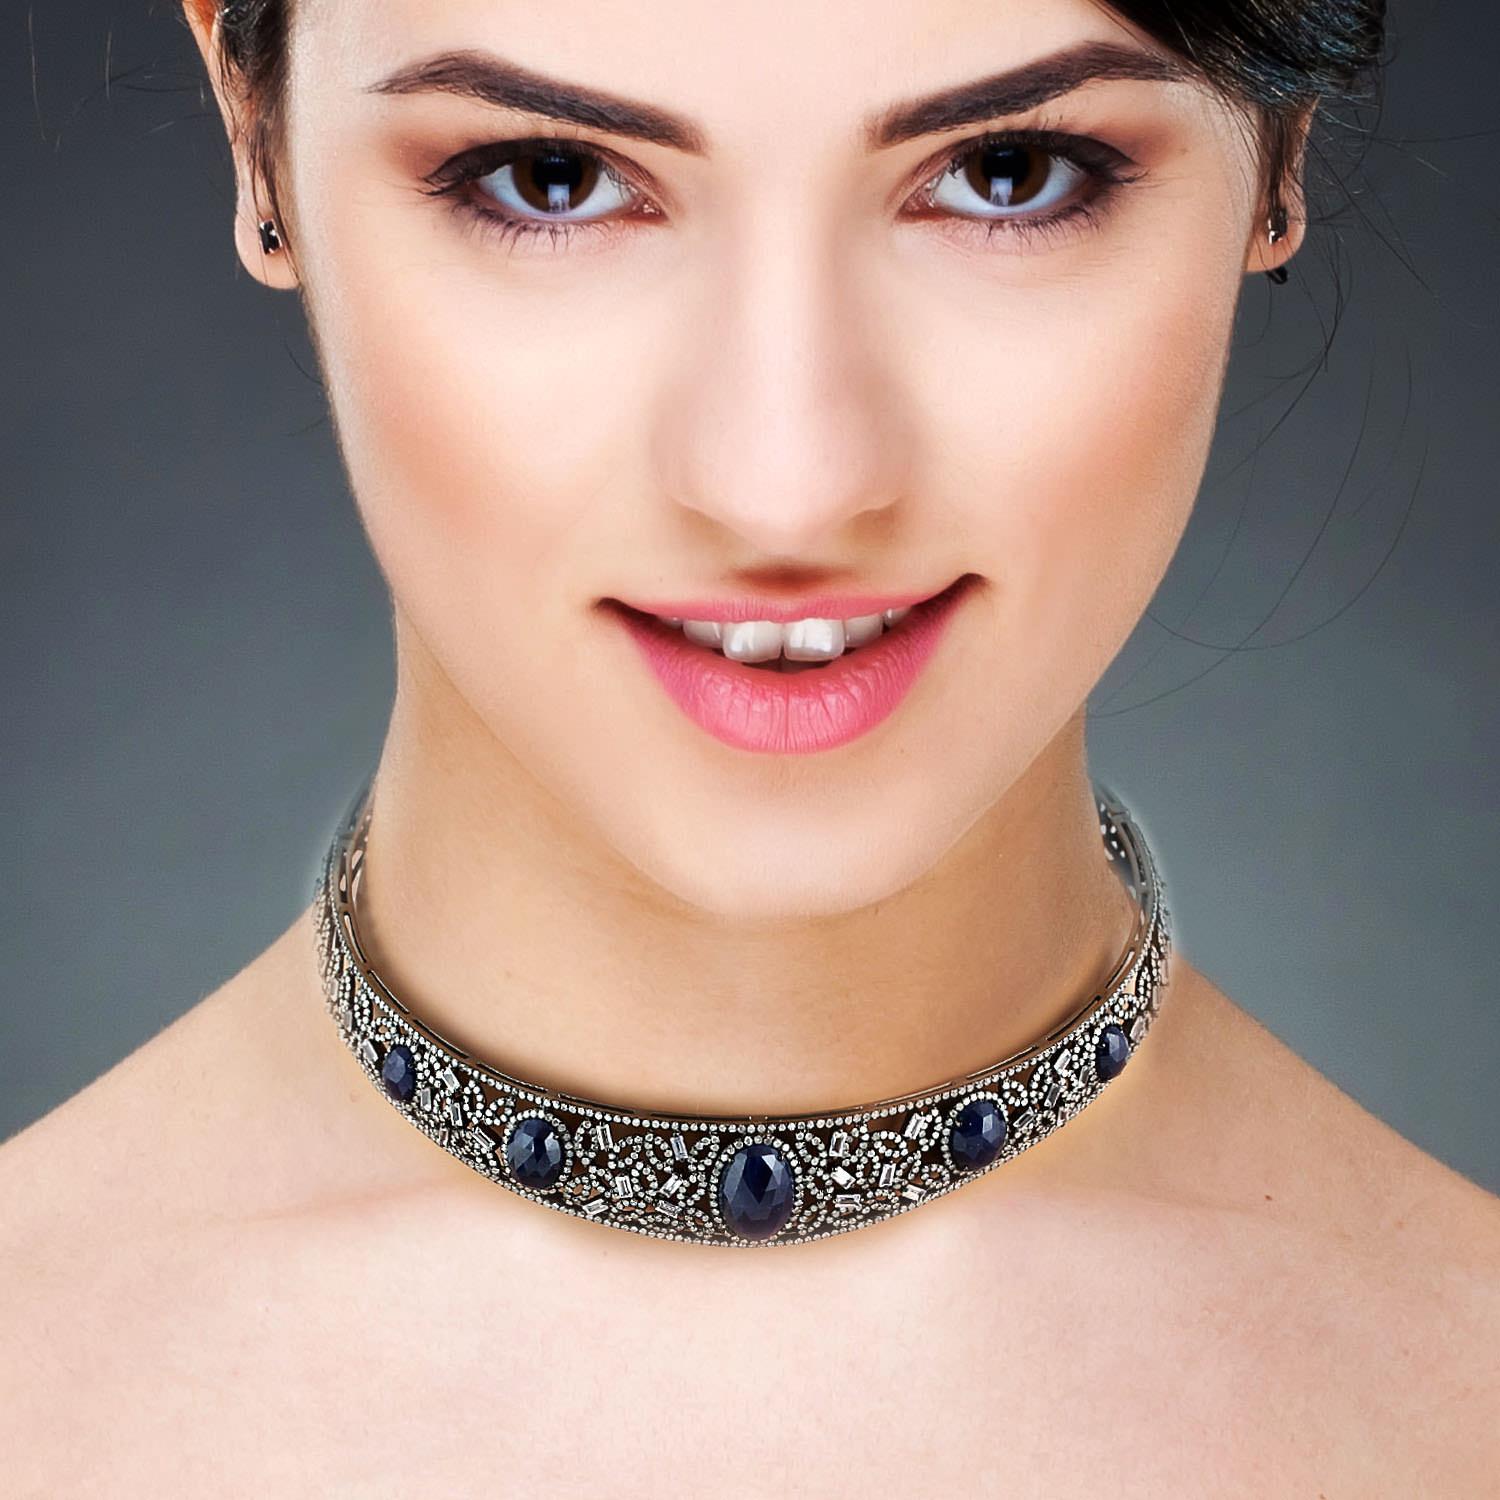 Cast in 18 karat gold and sterling silver, this stunning choker necklace is hand set in 20.75 carats blue sapphire and 5.72 carats of diamonds in blackened finish.

FOLLOW  MEGHNA JEWELS storefront to view the latest collection & exclusive pieces. 